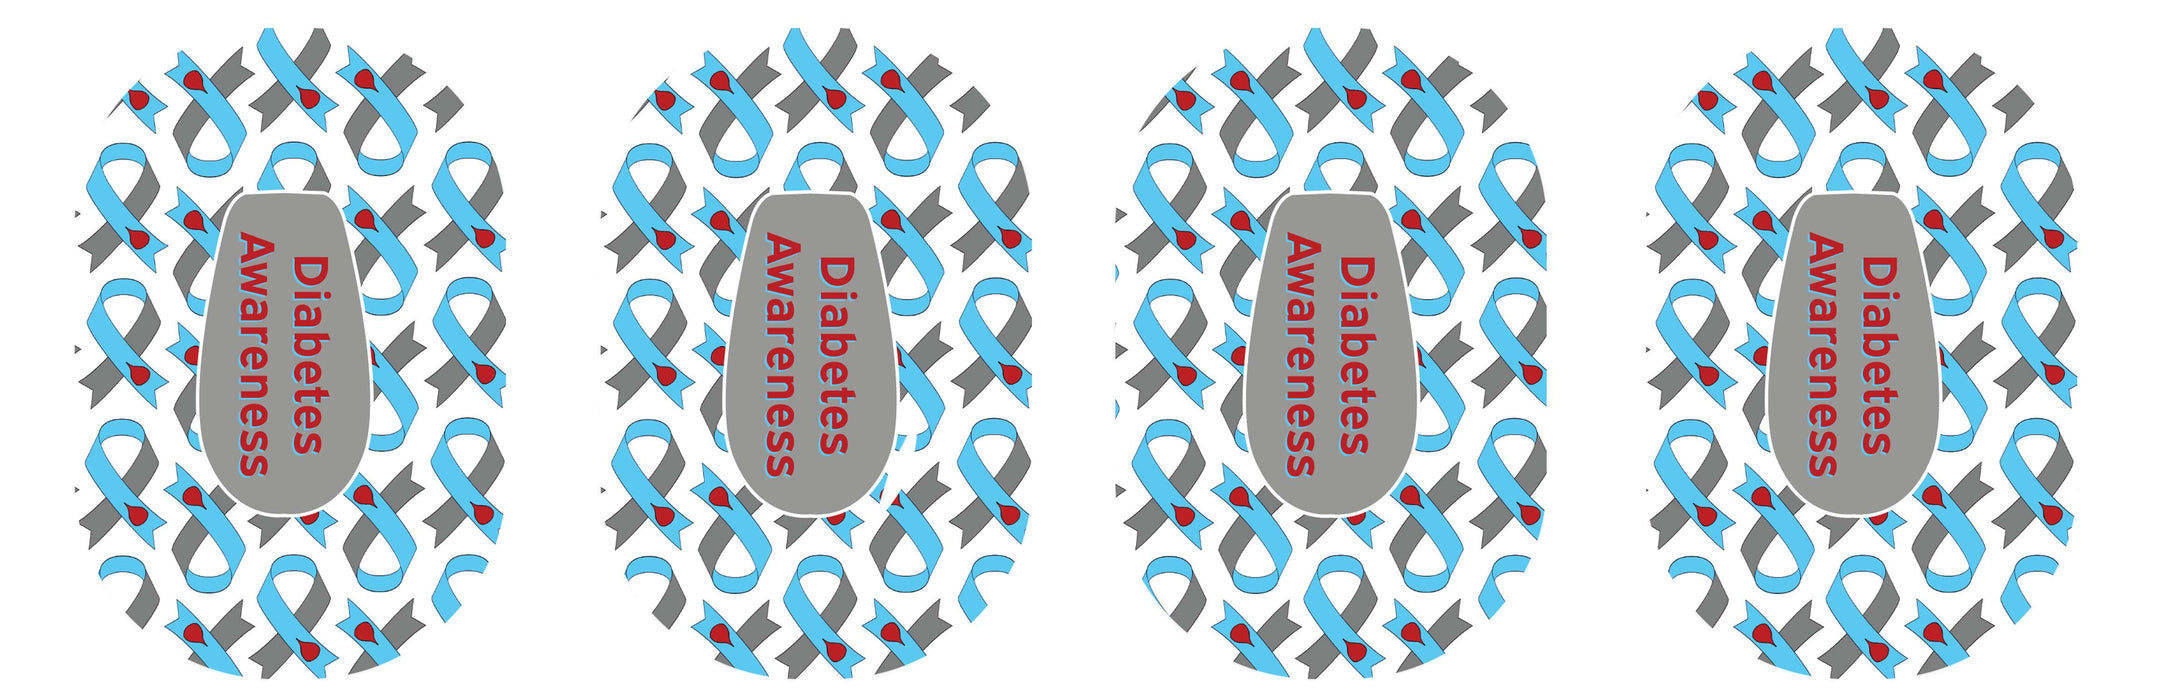 Support Patch Diabetes Awareness Ribbon Patch+ Tape